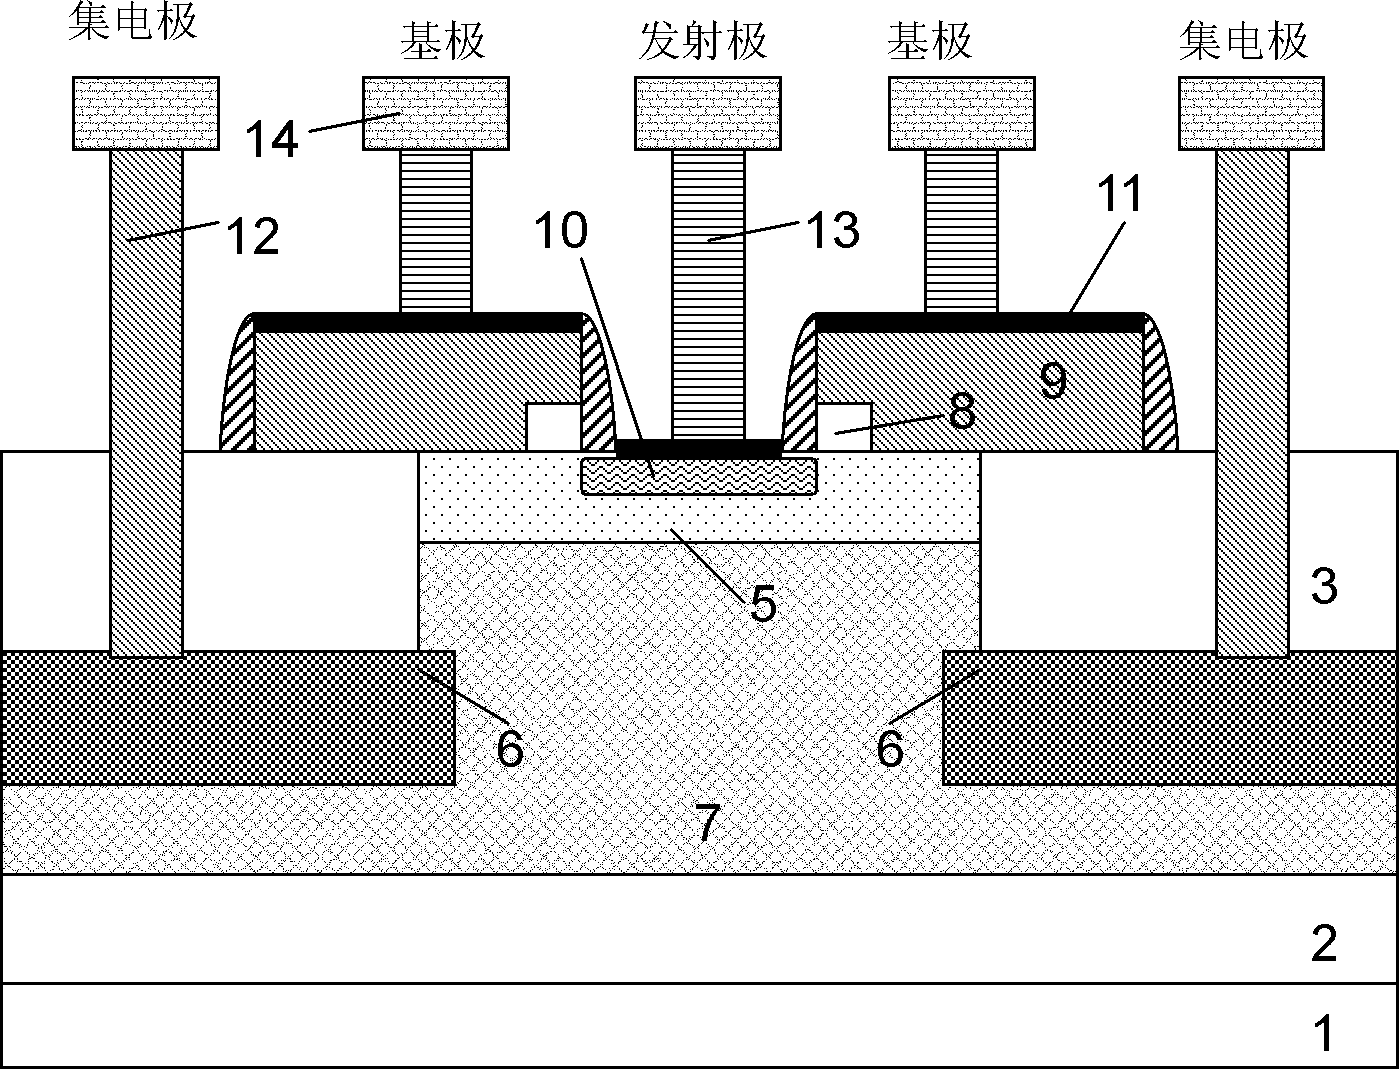 Vertical parasitic PNP device in BiCMOS technology and manufacturing method